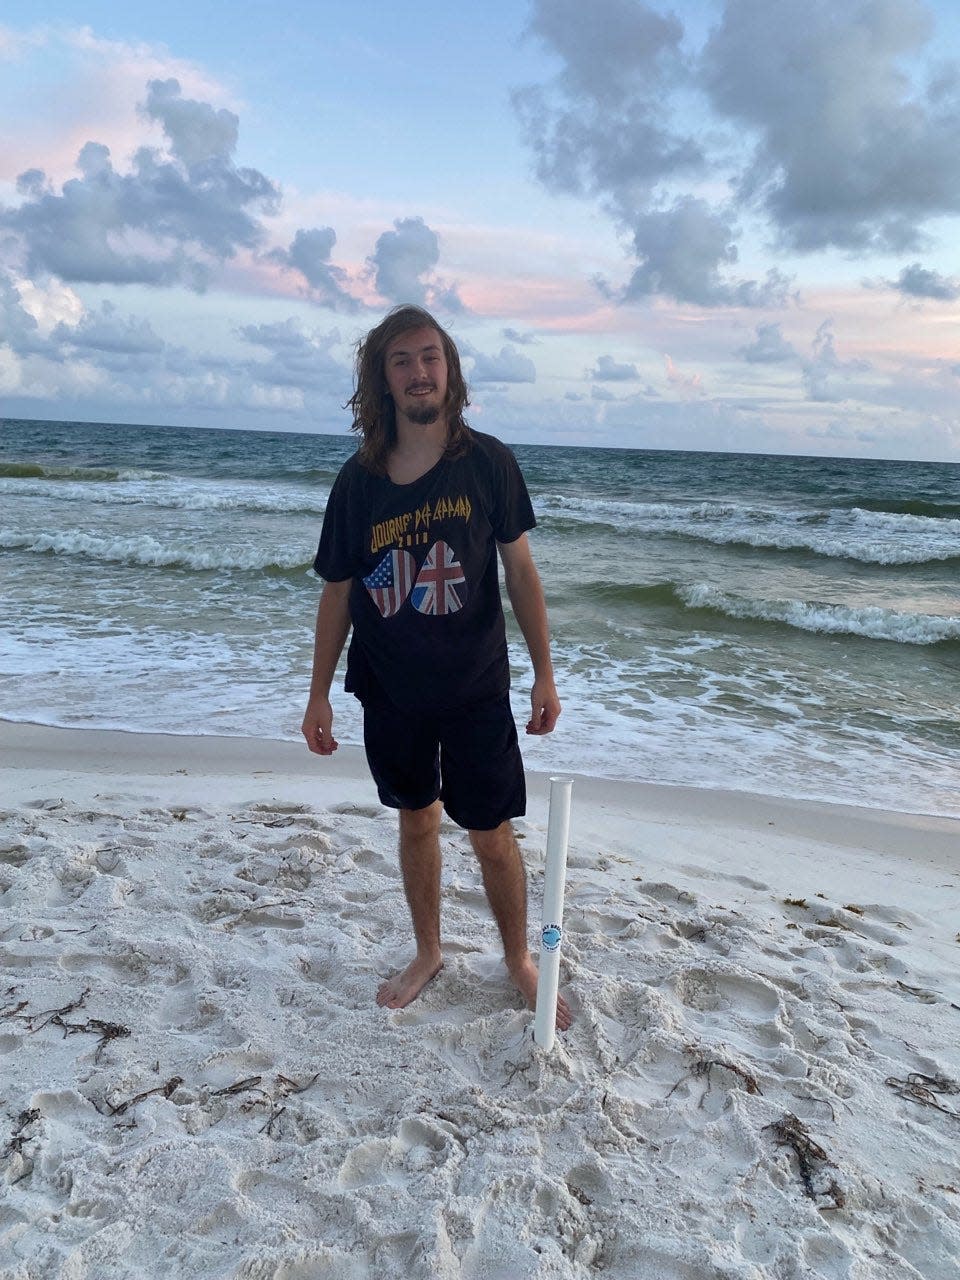 West Henderson graduate Bryson Parcell enjoys fishing at the beach in this photo provided by the family.